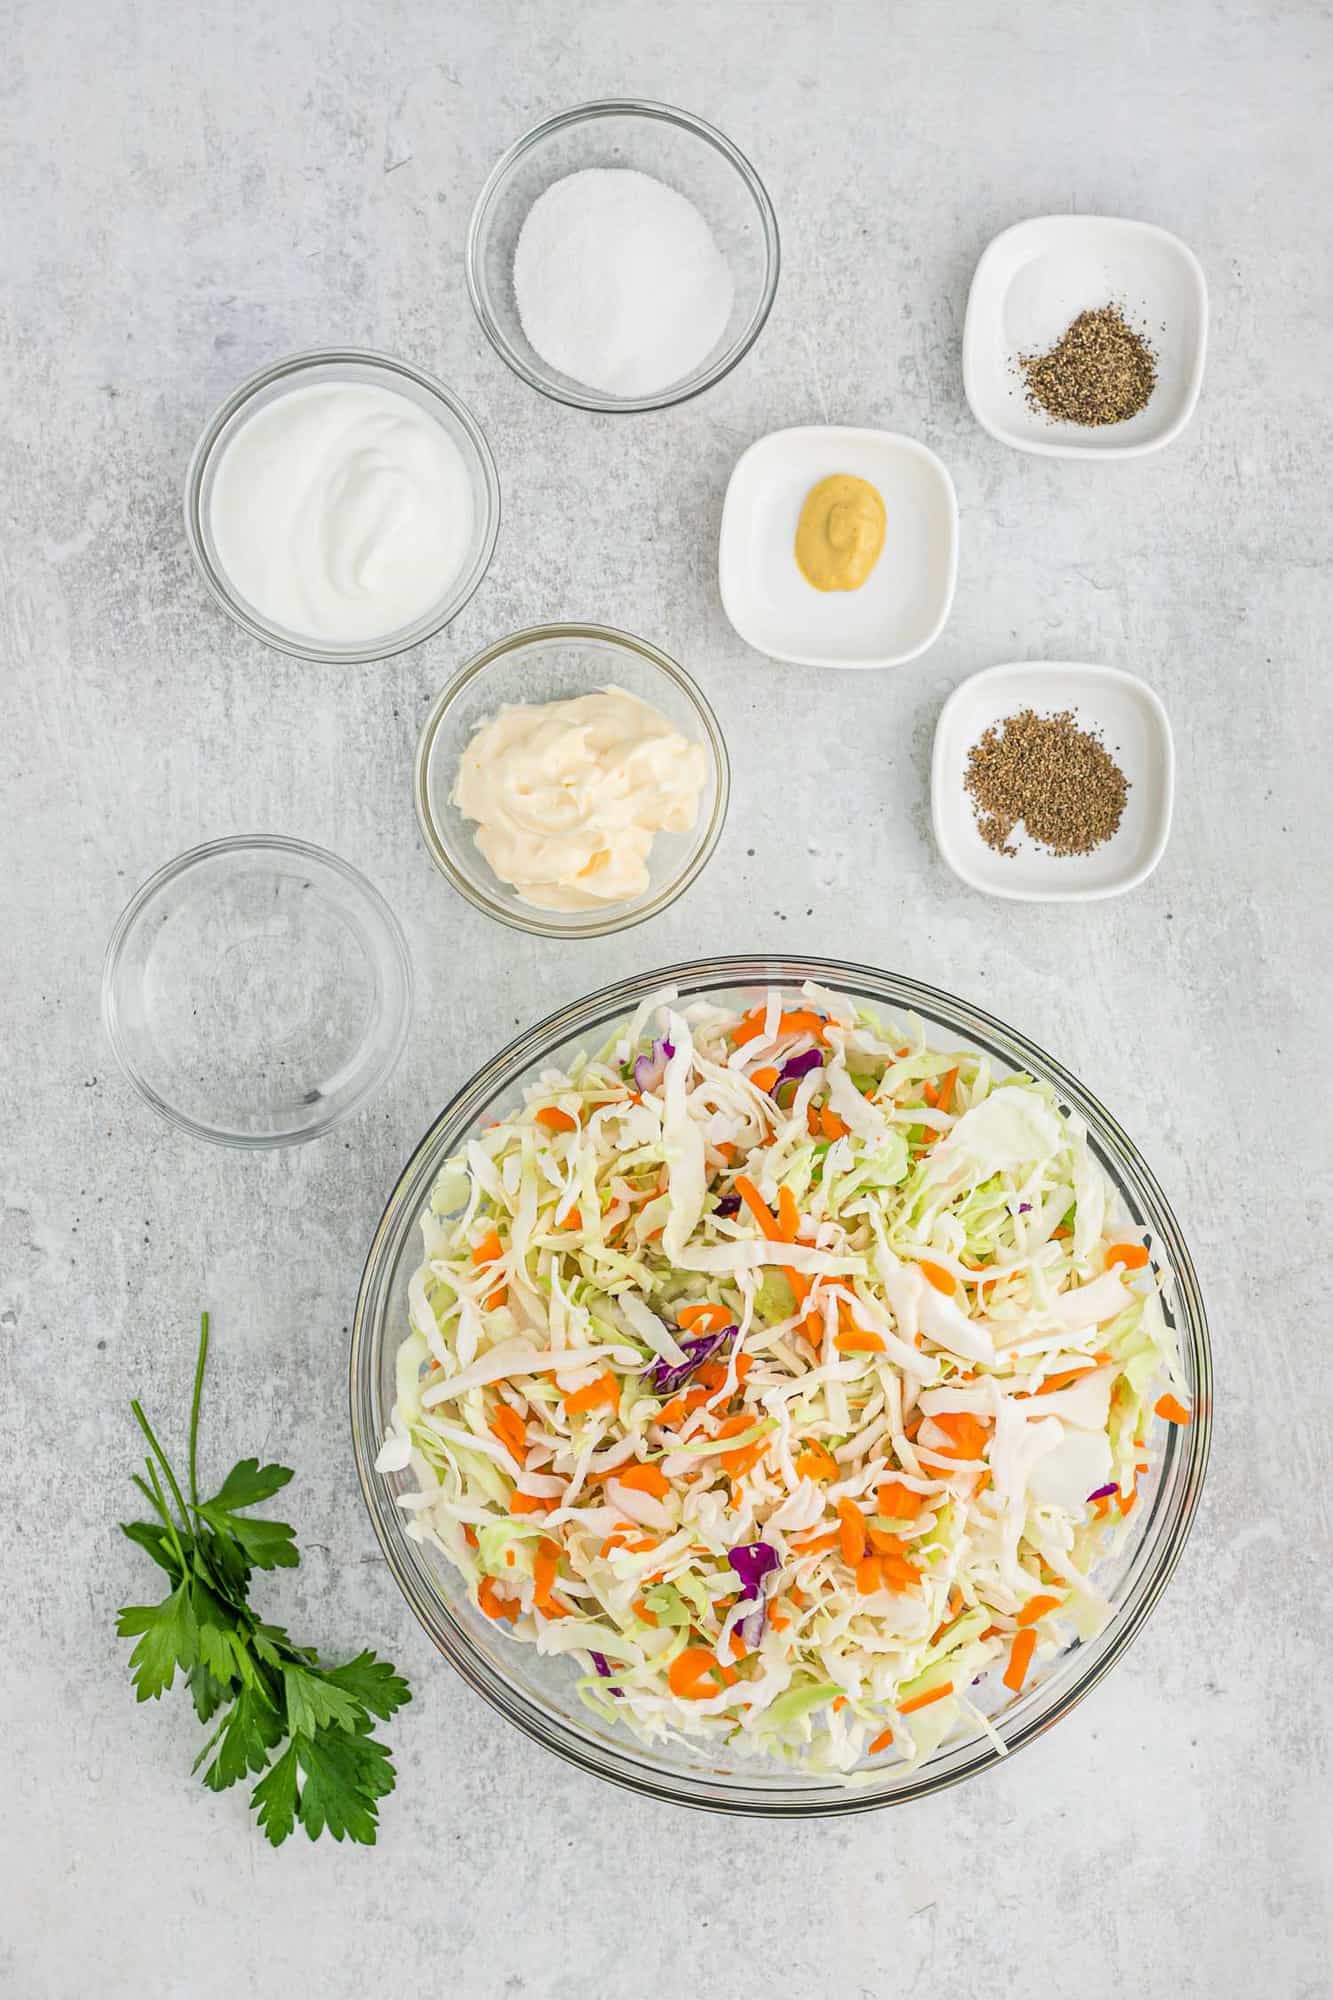 Ingredients in separate bowls, including shredded cabbage and carrots.